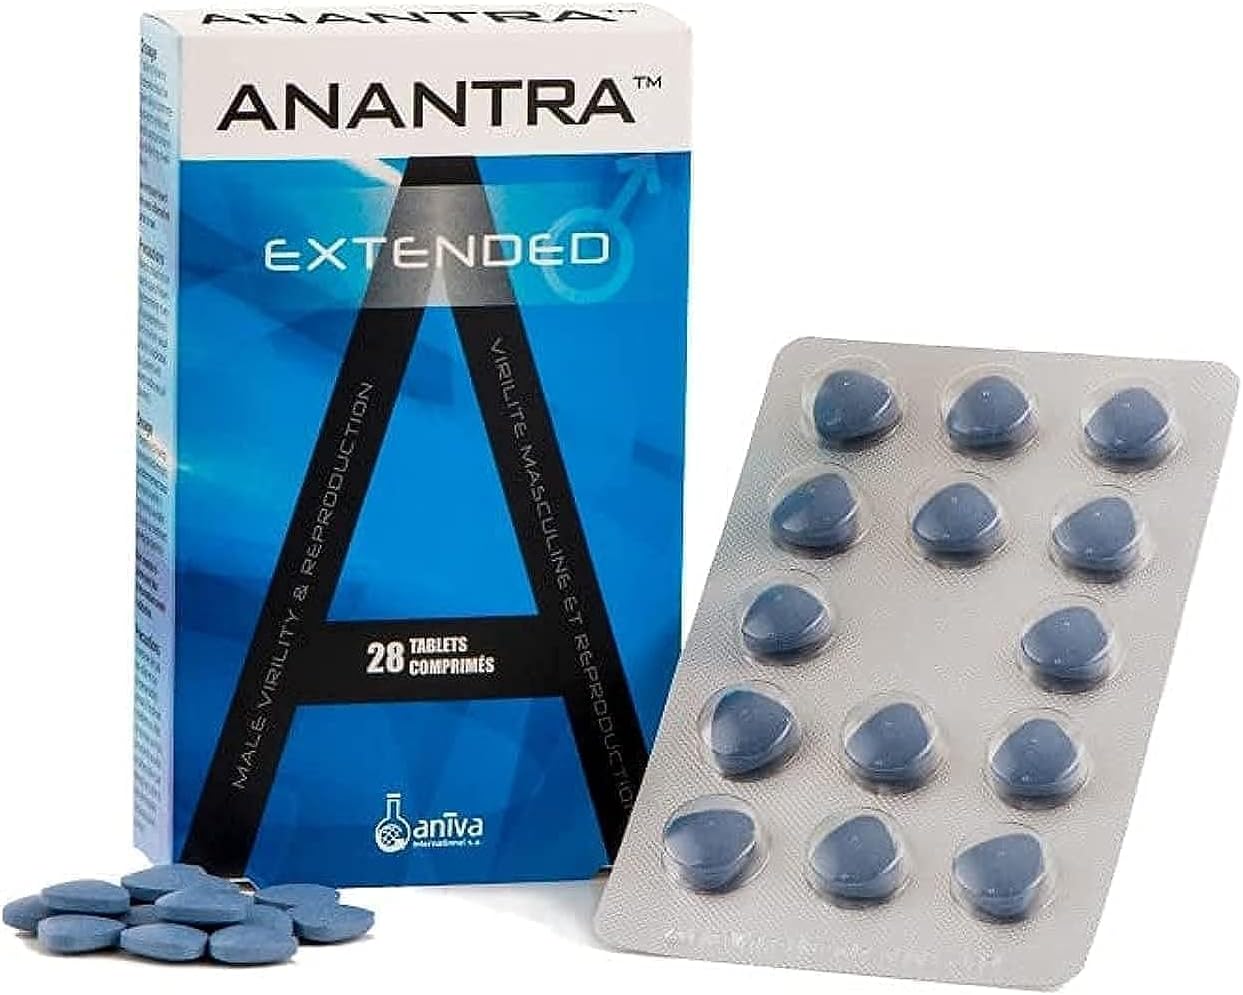 Anantra Extended Tablet 28 's